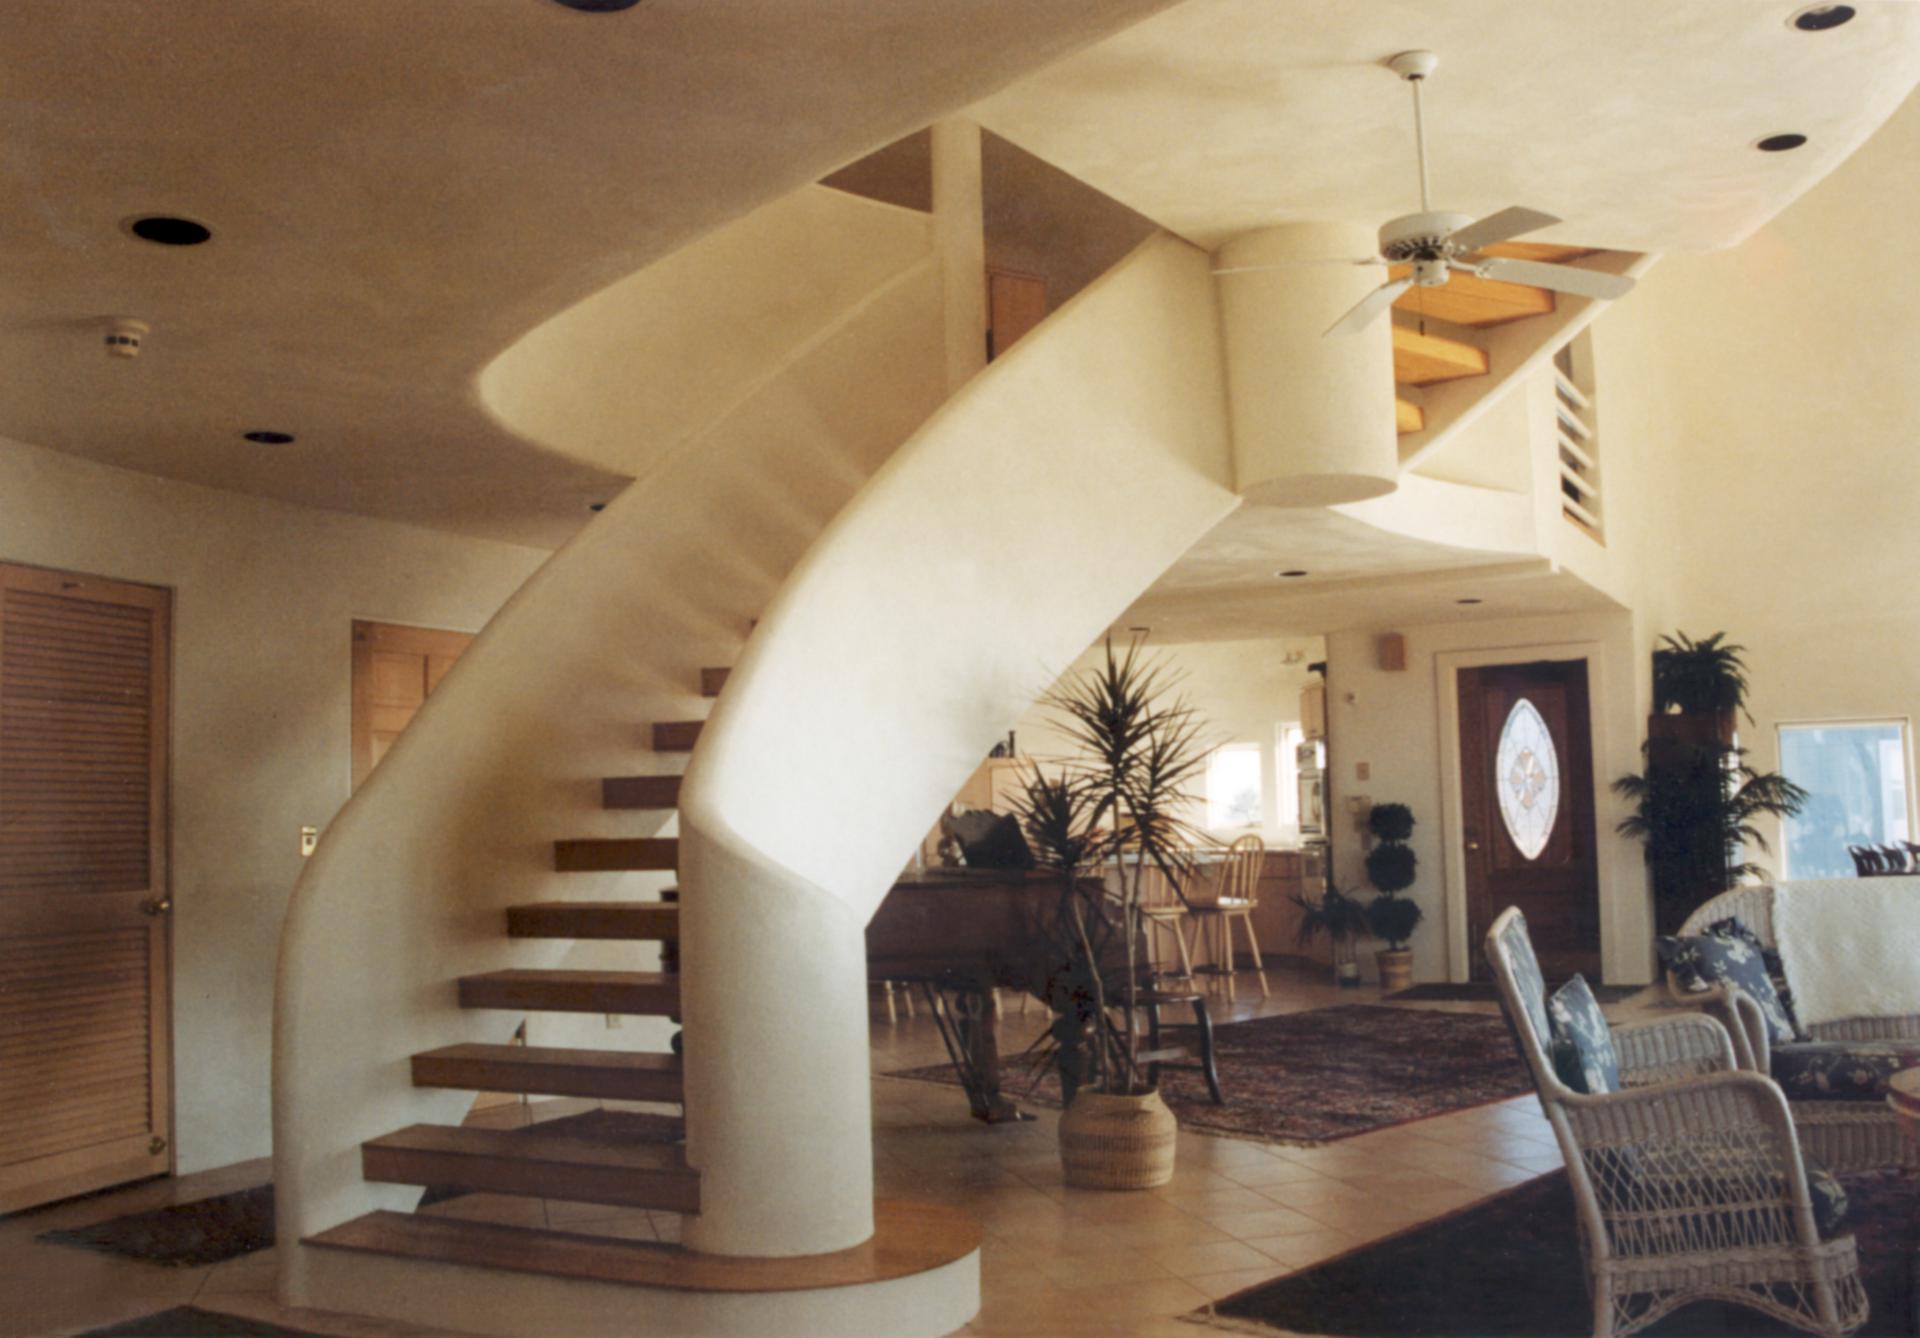 Curved stairway.